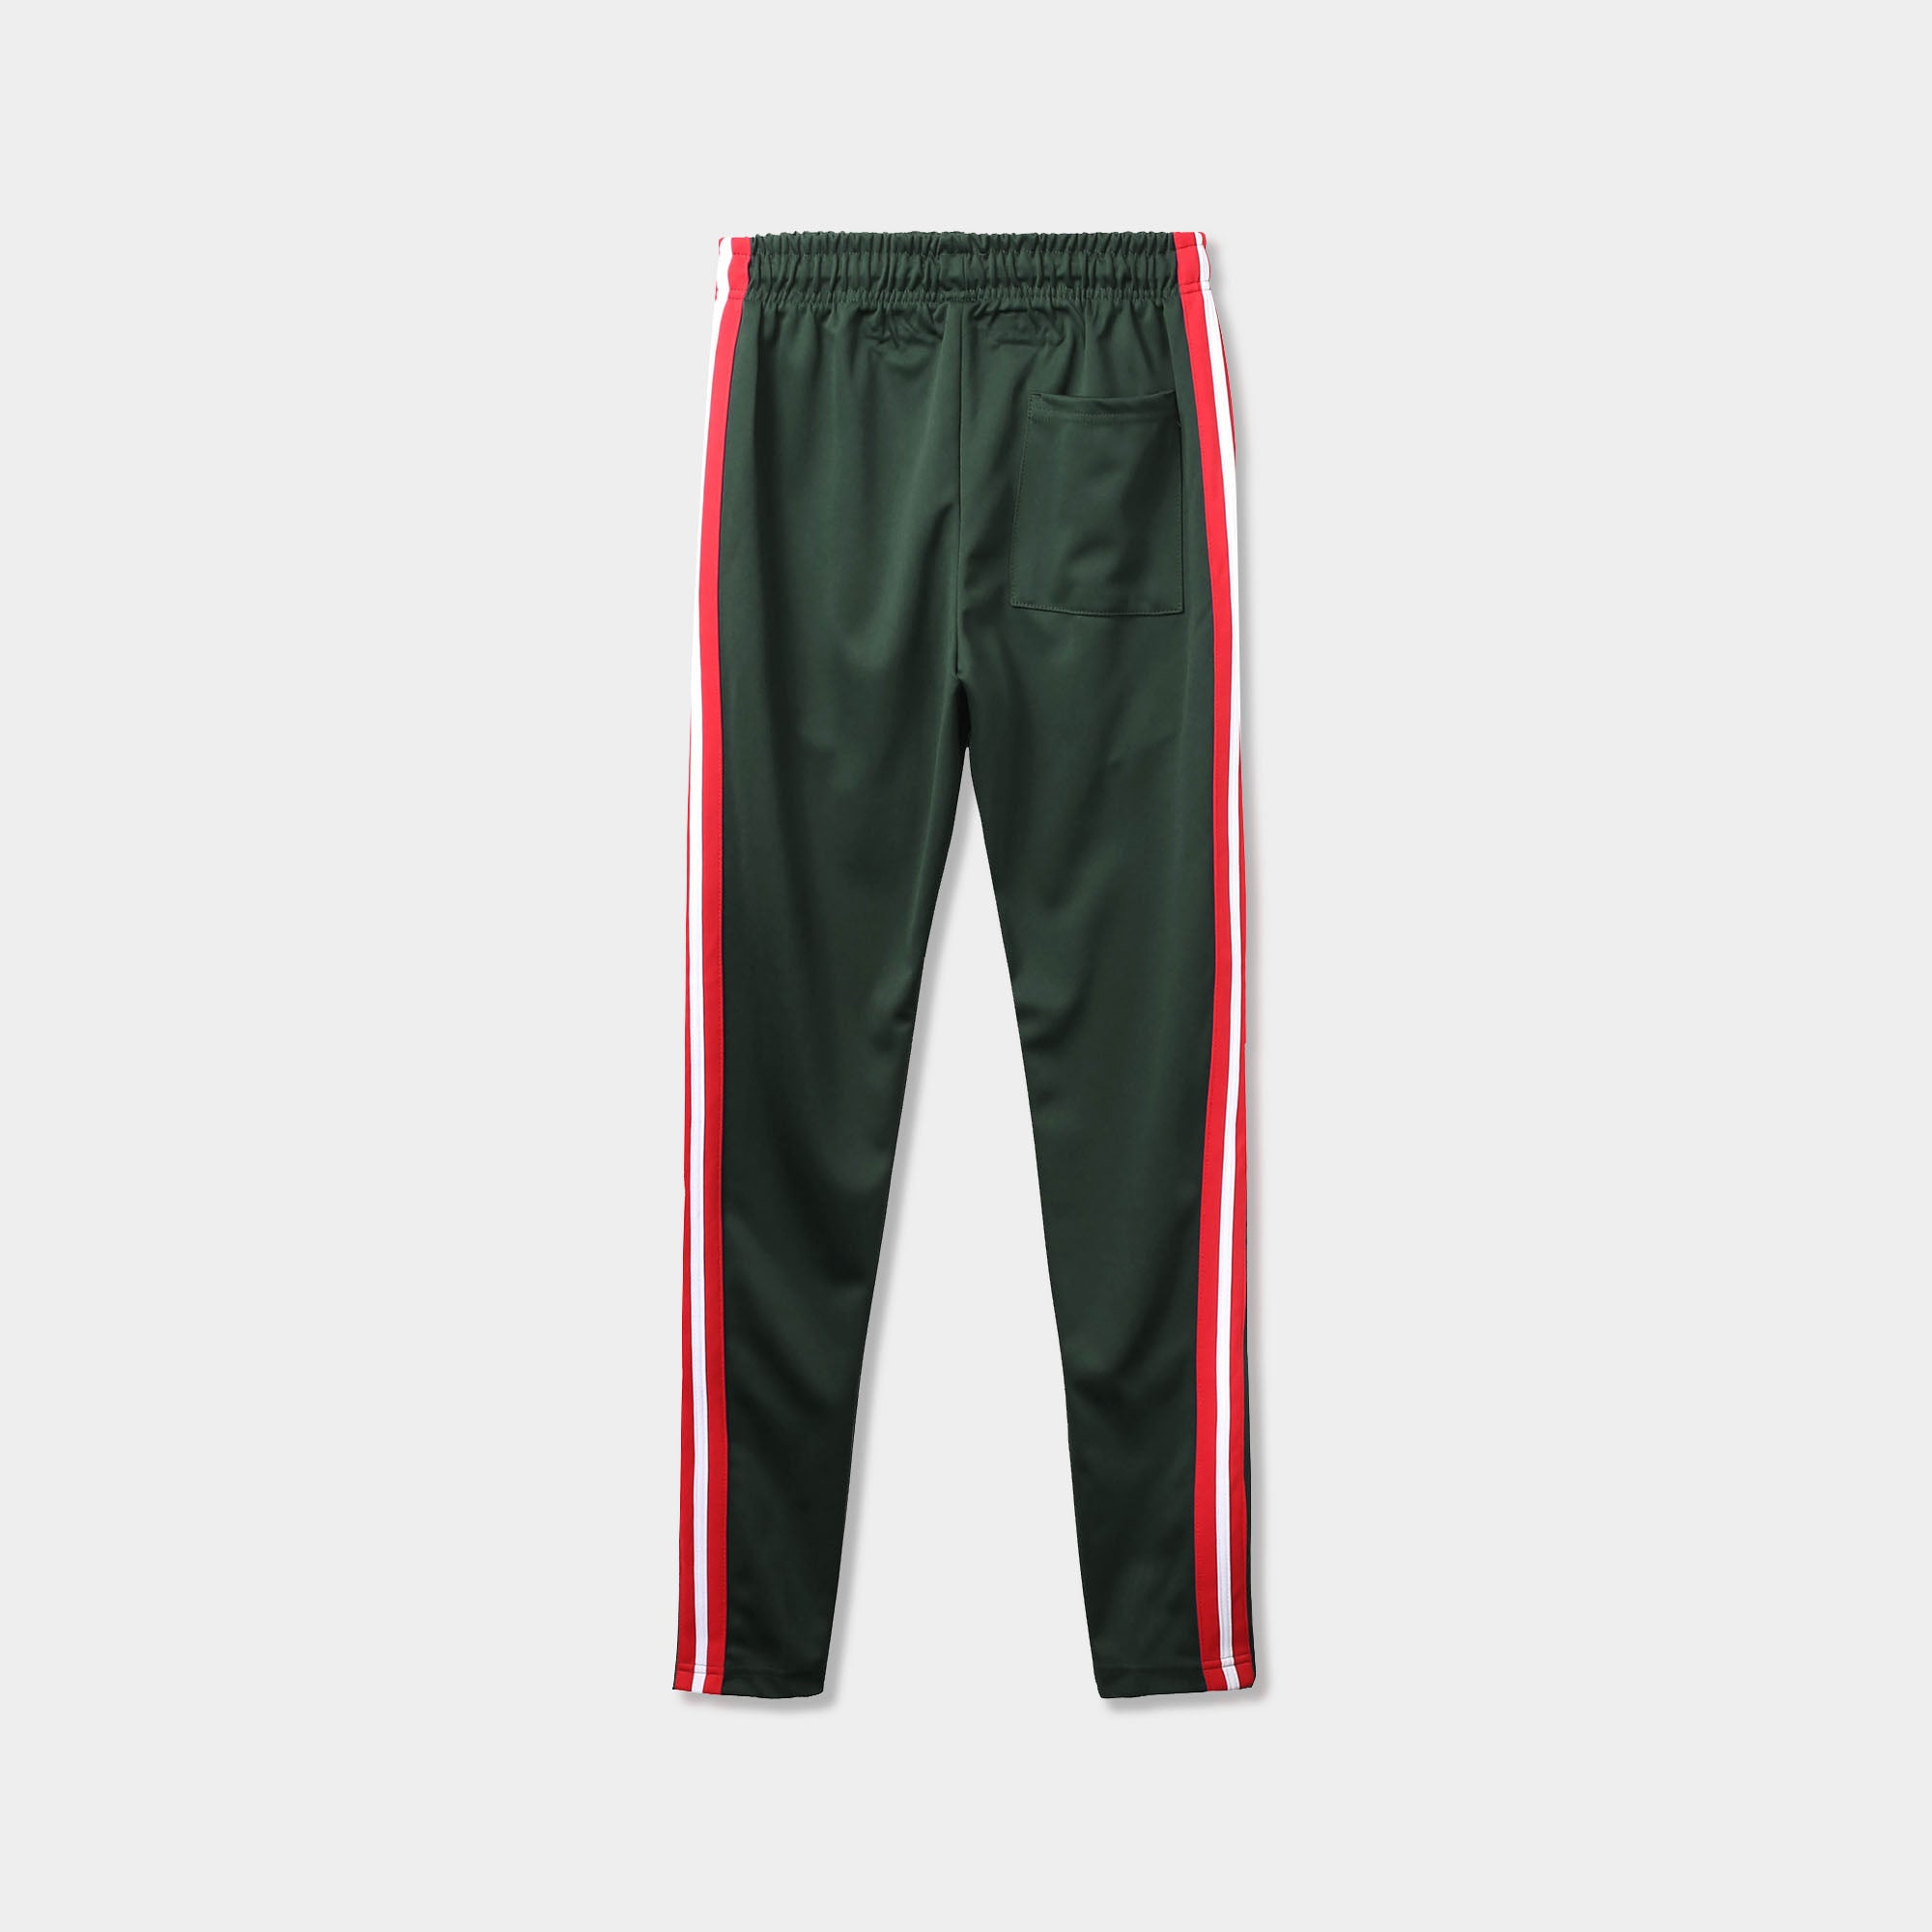 jogger_striped joggers_striped sweatpants_velvet joggers mens_sweatpants_side stripe joggers mens_champion sweatpants_champion joggers_mens joggers_Hunter Green/Red/White